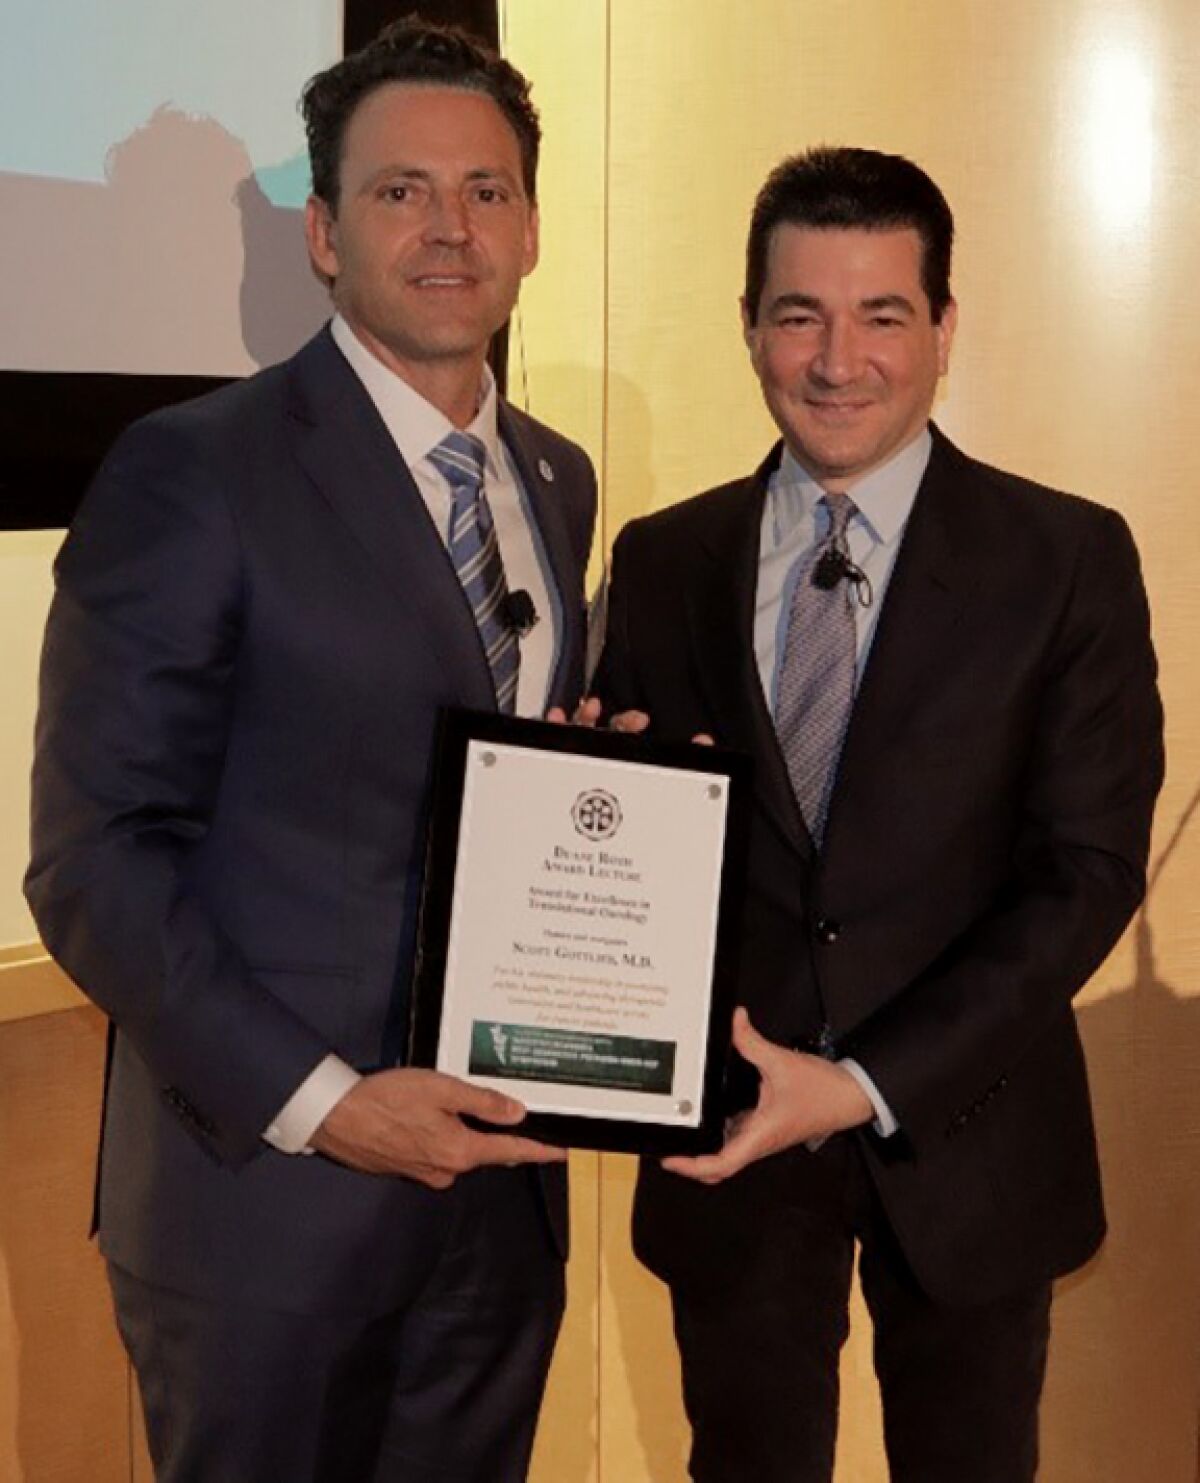 4th District San Diego County Supervisor Nathan Fletcher (left) presents Dr. Scott Gottlieb with the Duane Roth Achievement Award and proclaims Feb. 20, 2020 as "Scott Gottlieb Day."